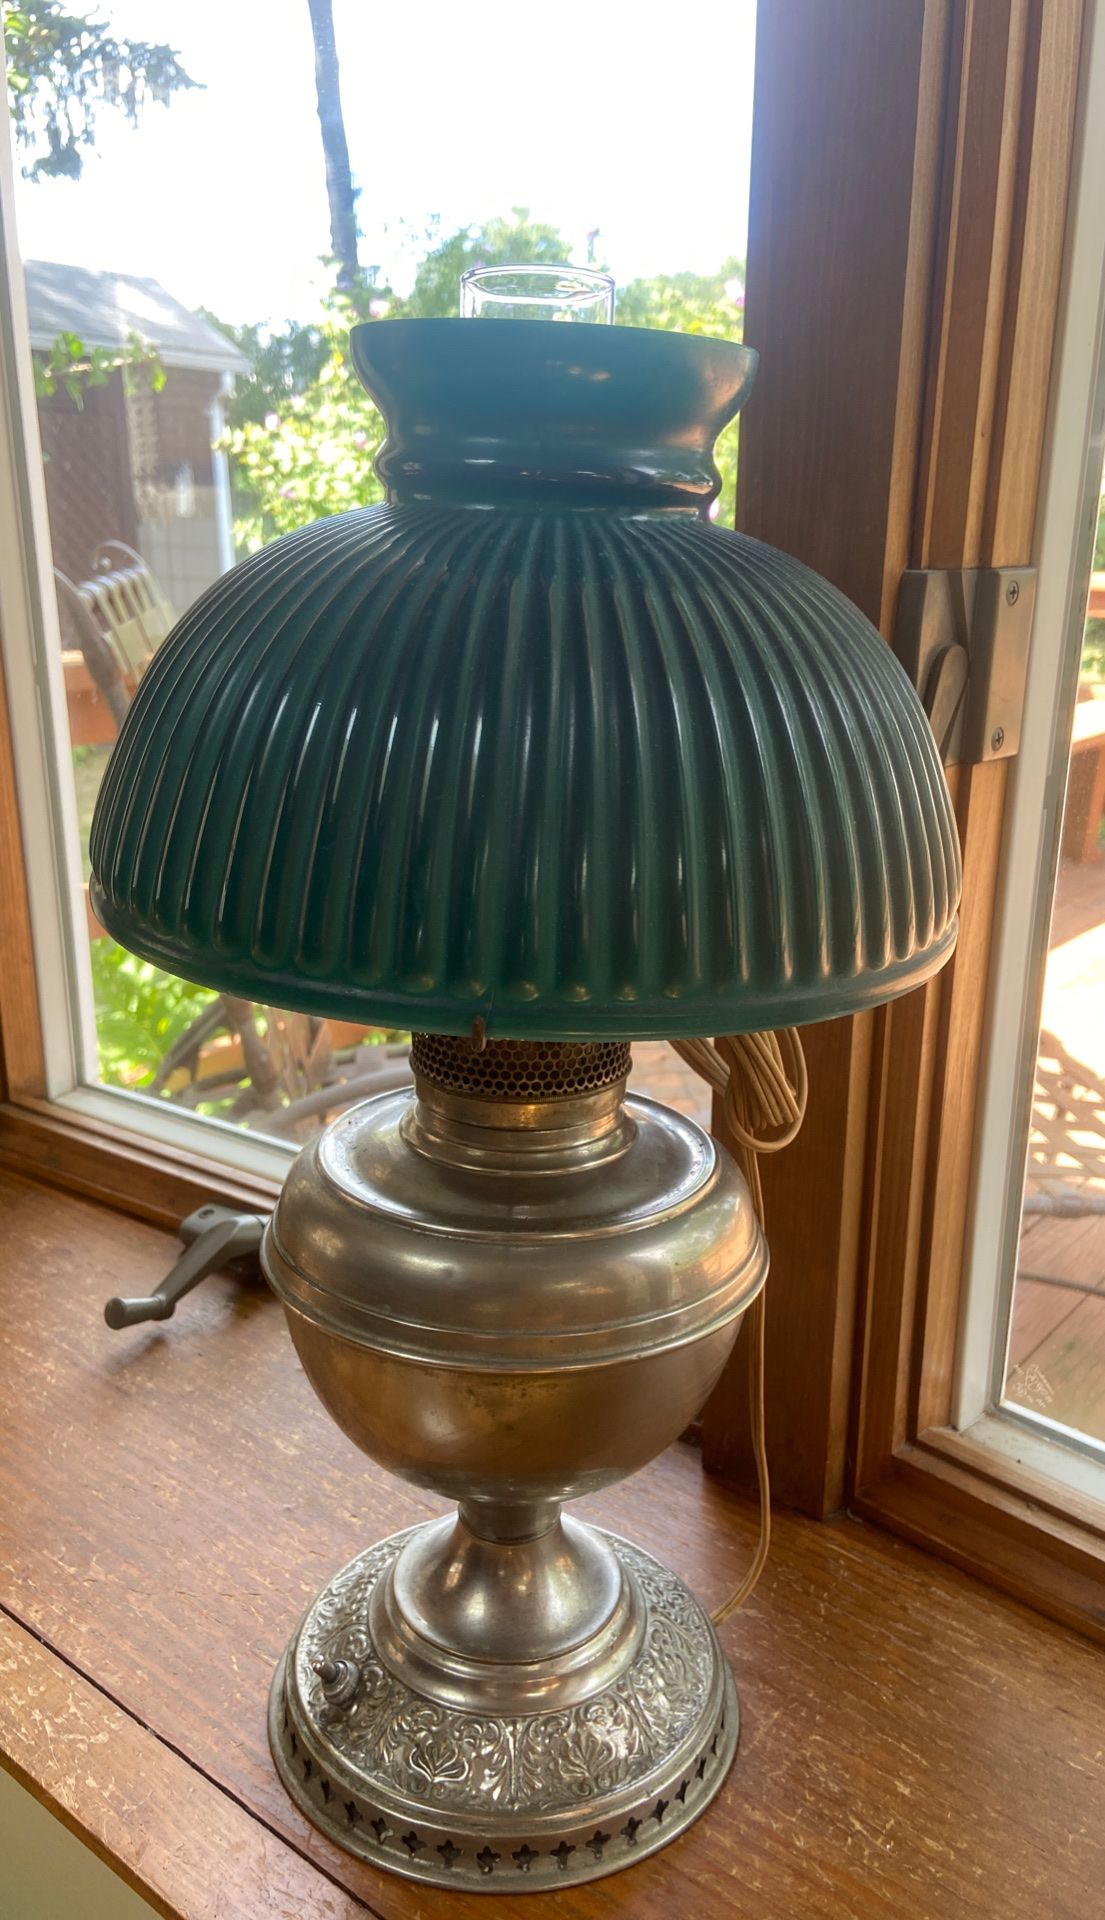 Converted oil lamp